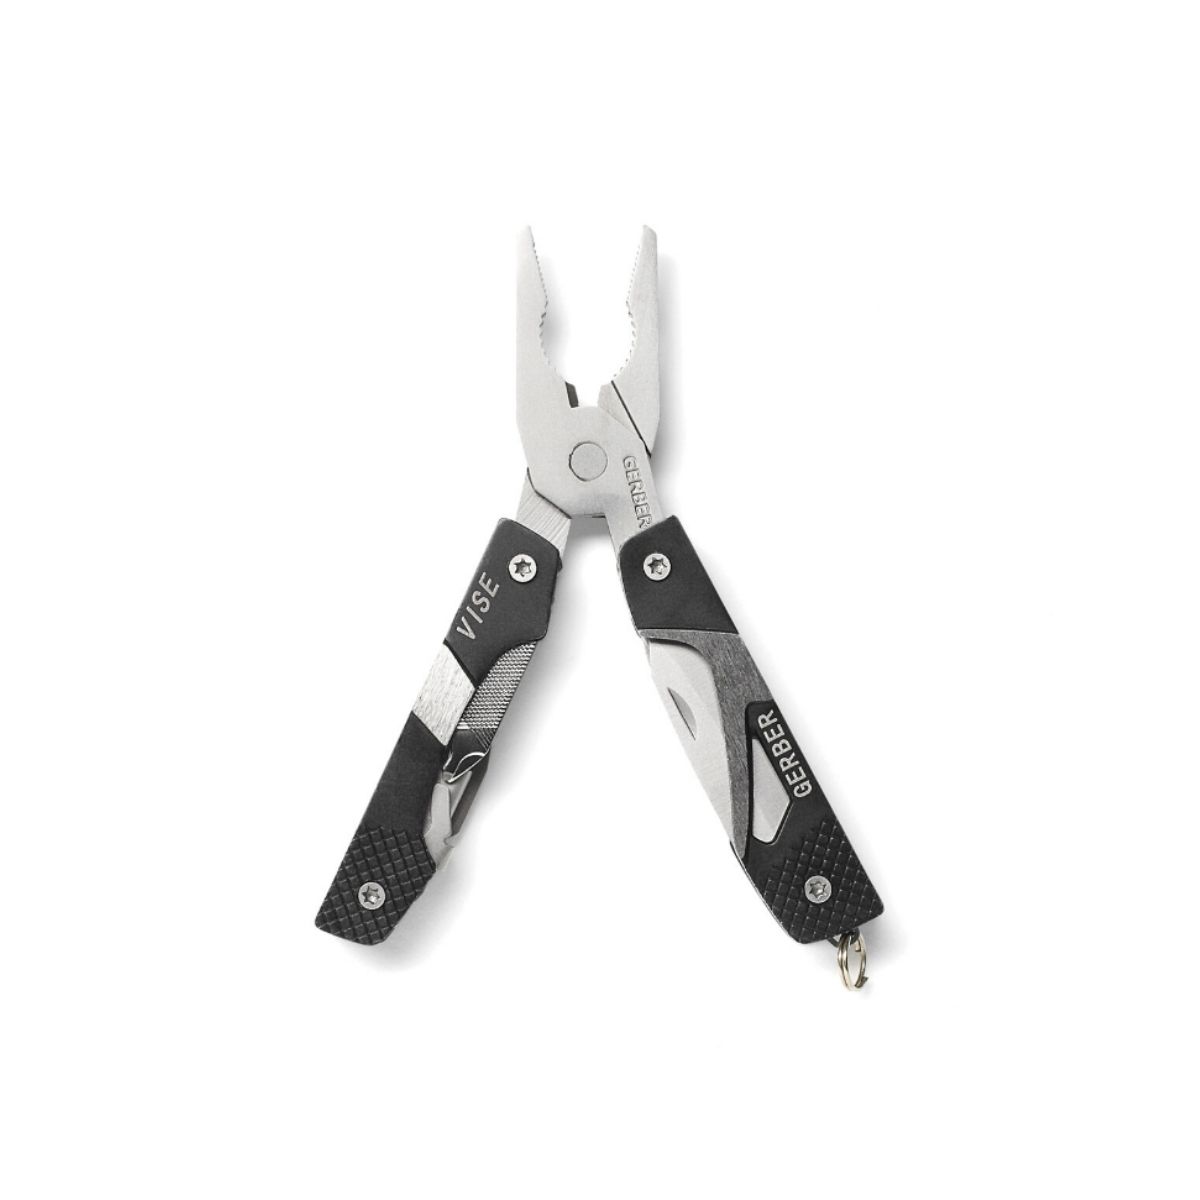 Bricege si unelte multifunctionale - Multitool EDC (everyday carry) GERBER, Vise, hectarul.ro